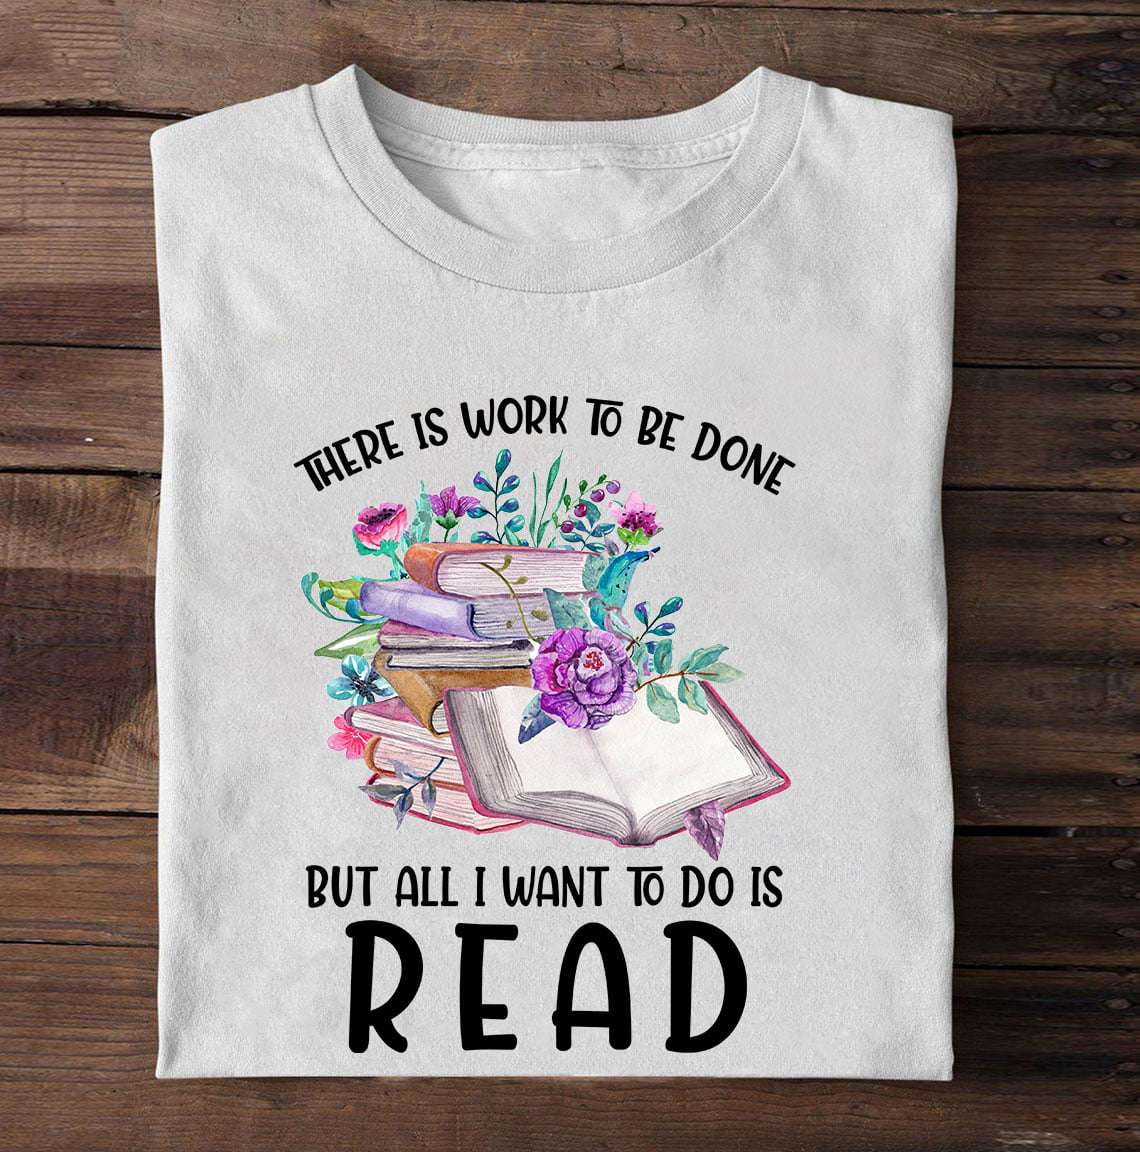 There is work to be done but all I want to do is read - Love reading books, gift for book reader